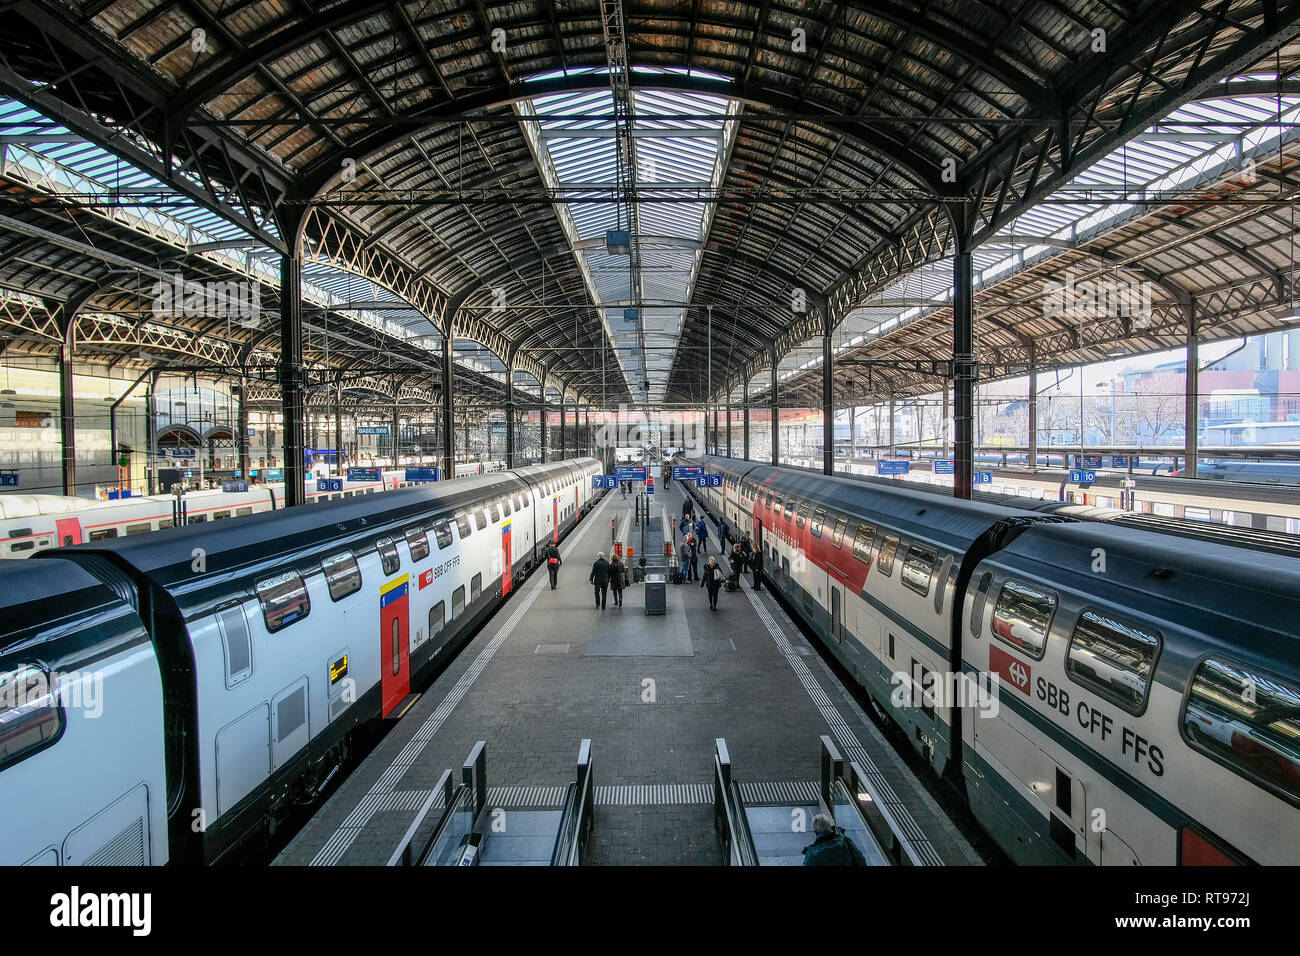 Platform of Europe's largest border station, Basel SBB station, with waiting trains of the Swiss Federal Railways SBB. Stock Photo